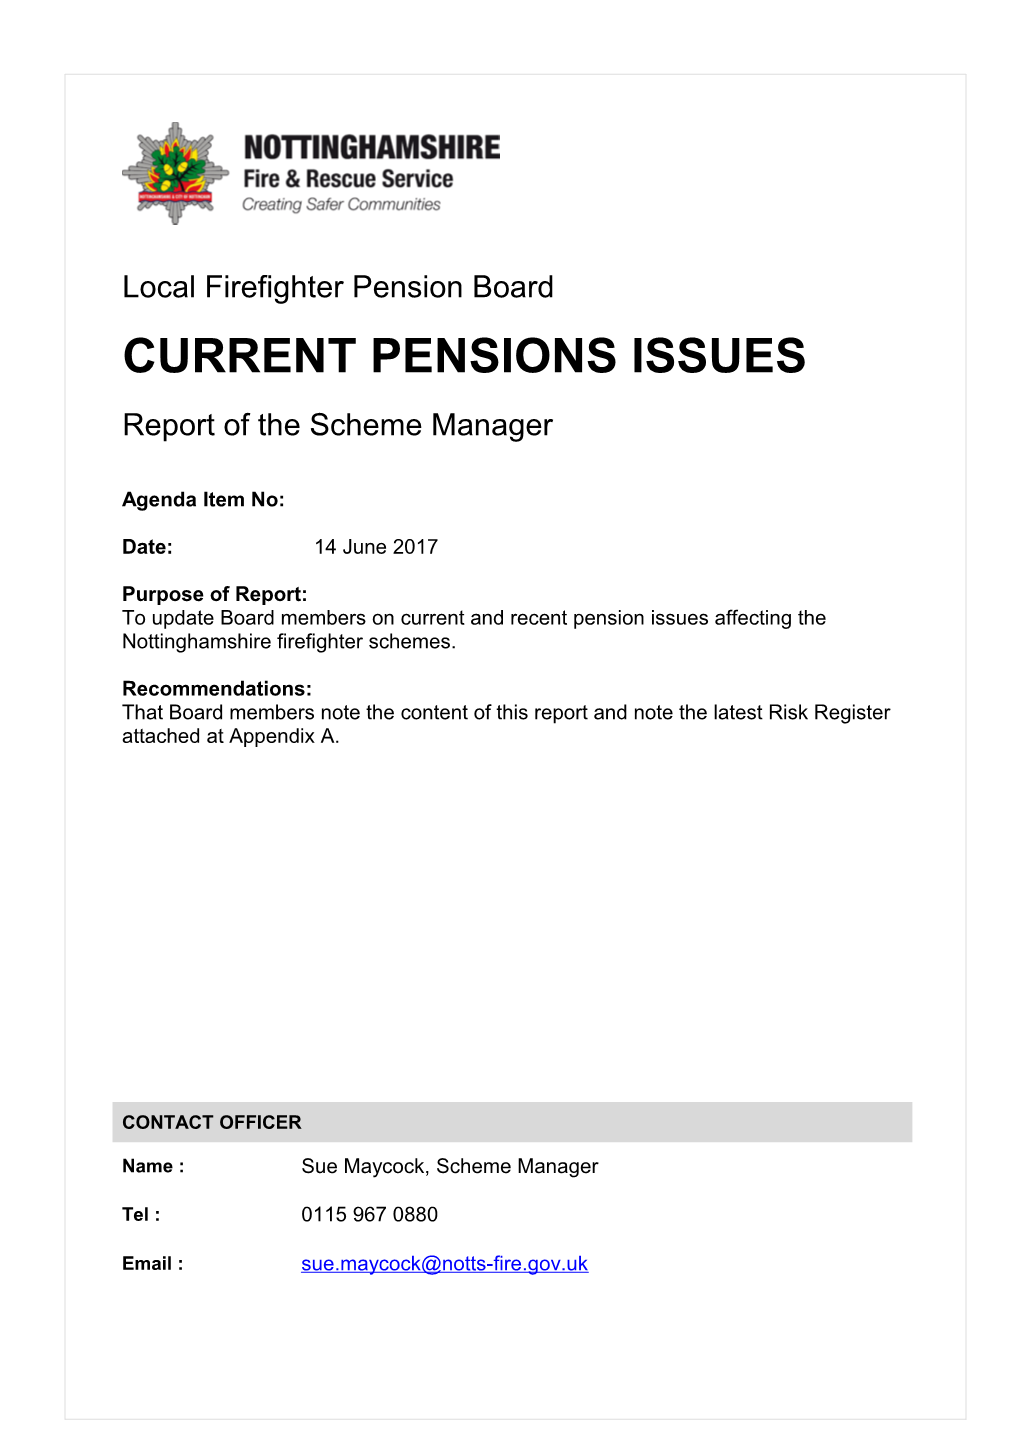 Current Pensions Issues